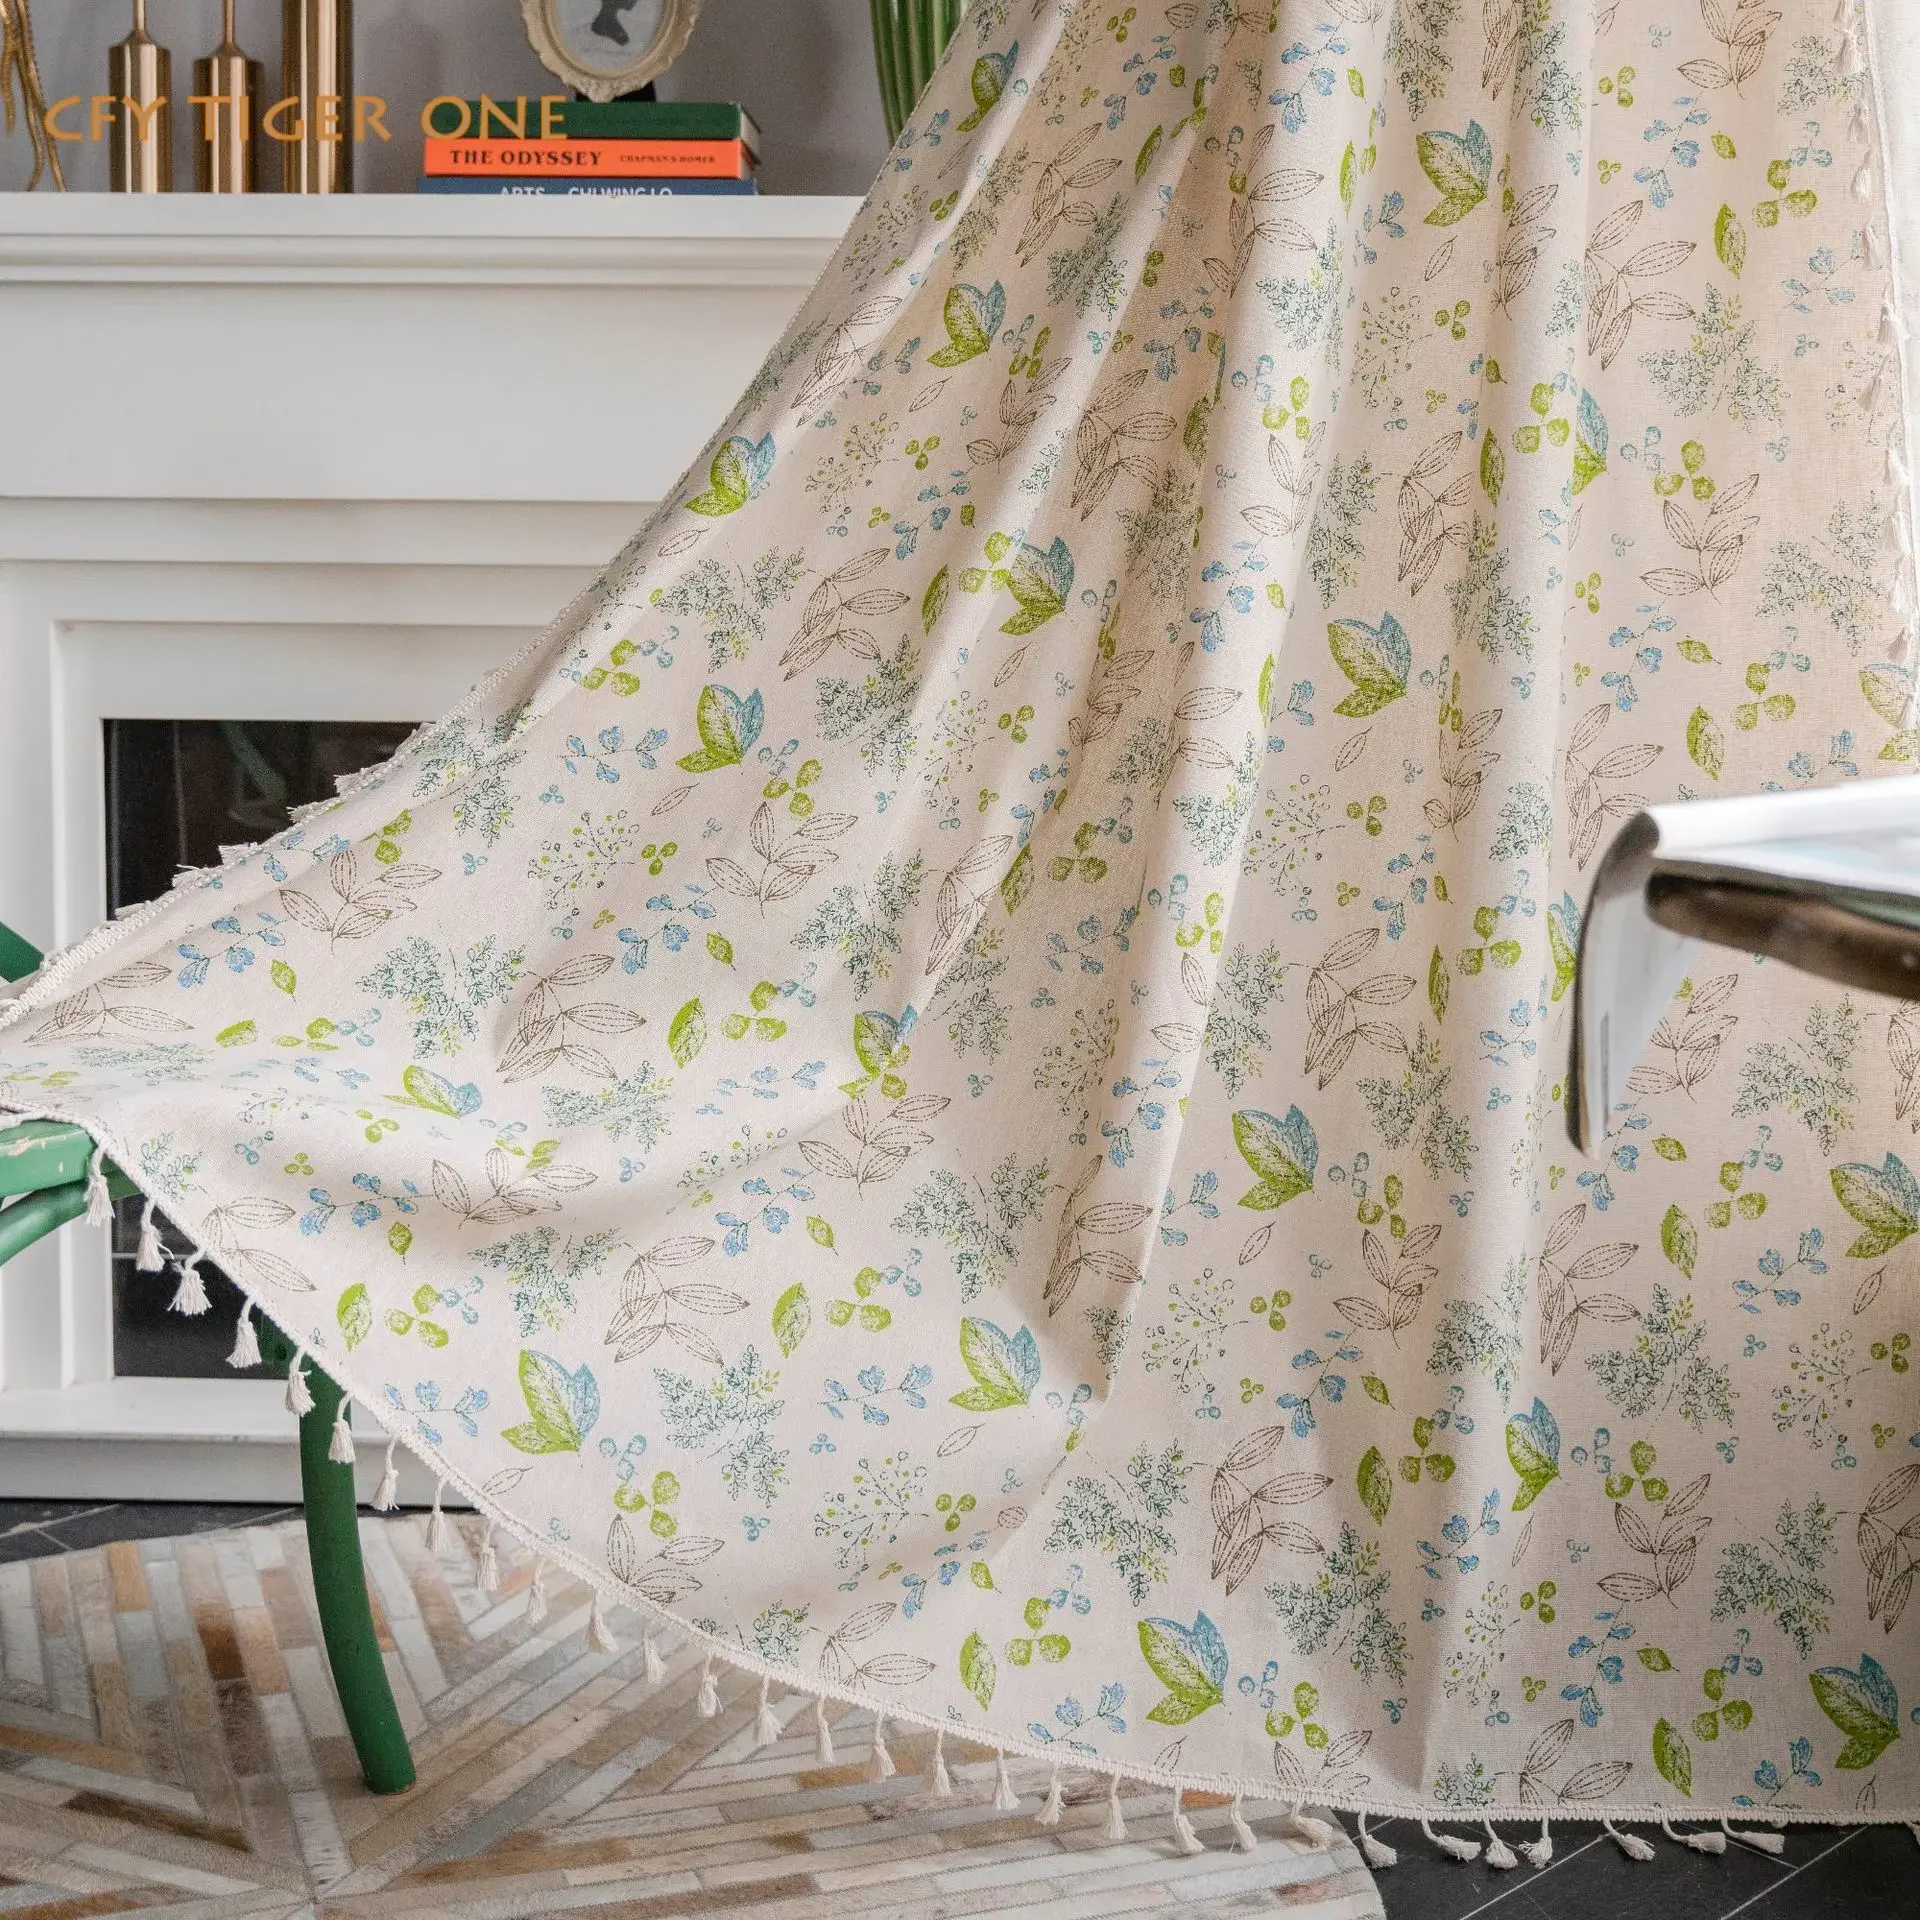 

Cotton Linen green leaves with Tassel Window Curtain Semi-shading Drapes for Living Room Bedroom Kitchen Door Drapes